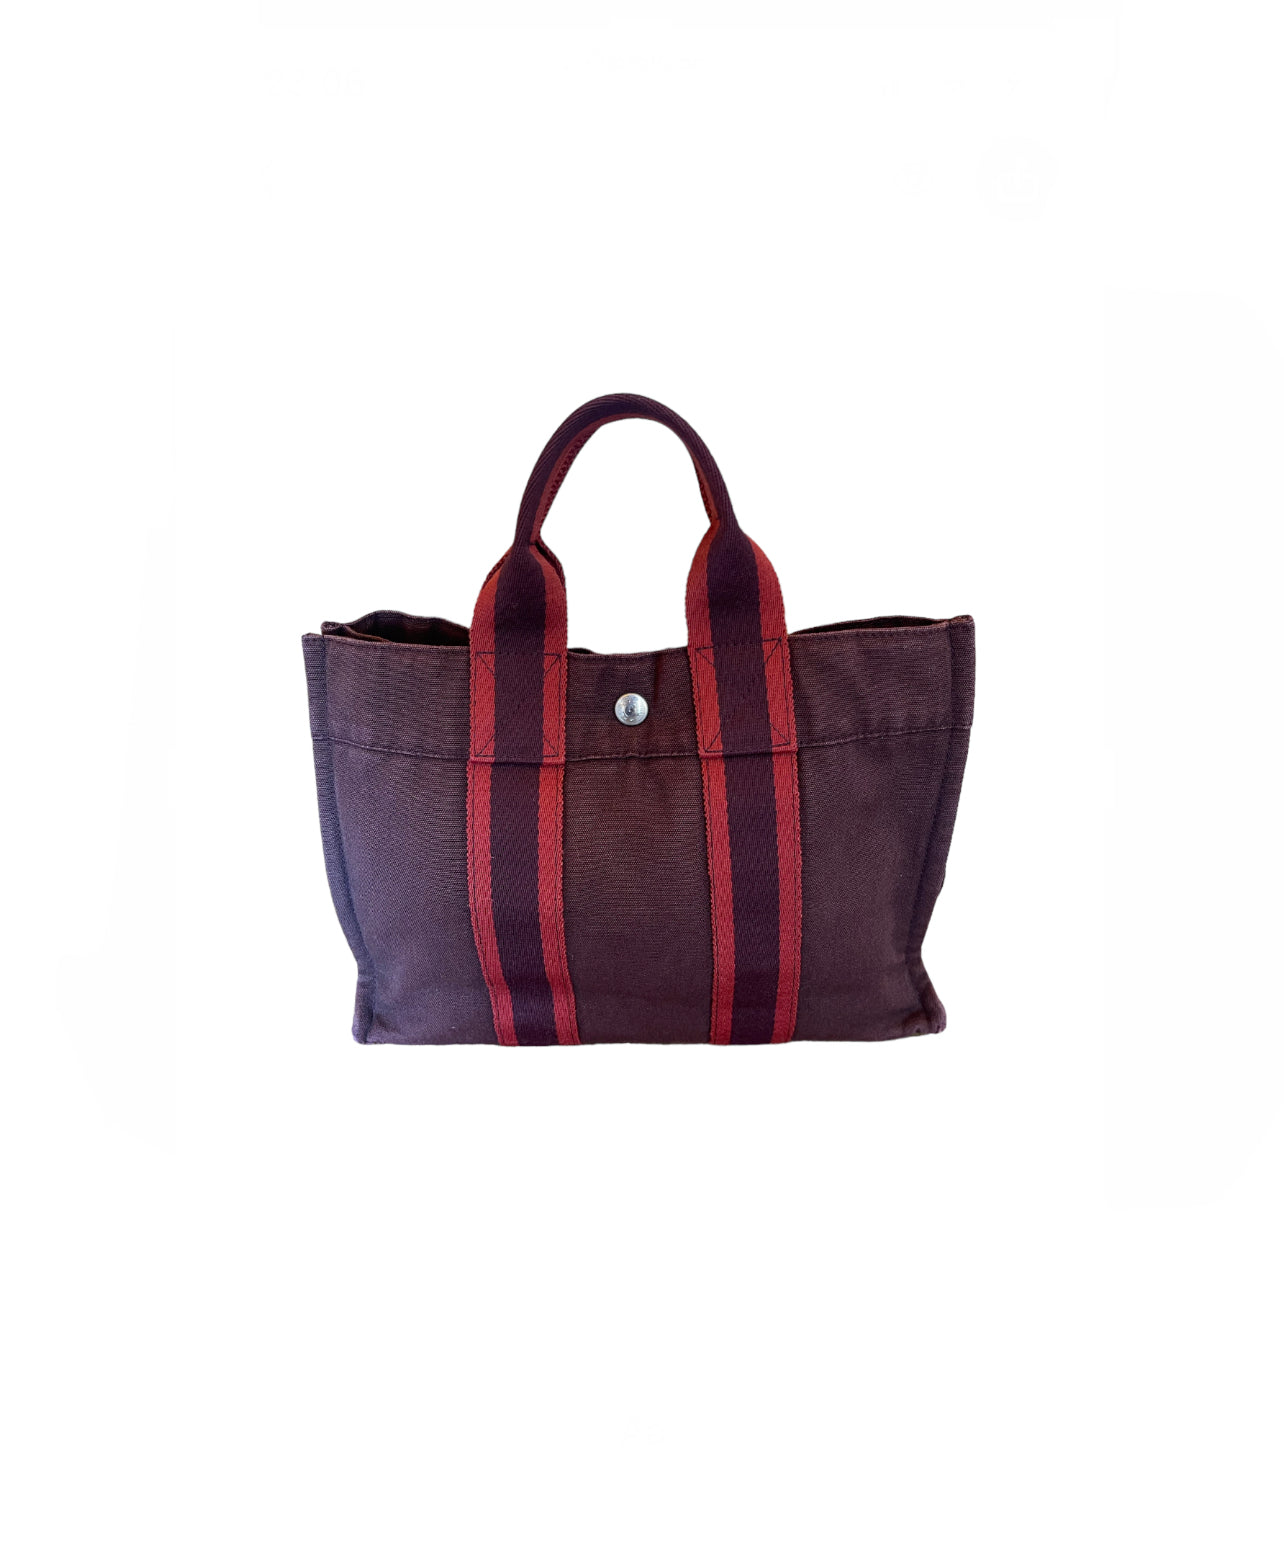 Hermes Dark Red Canvas Small Tote Bag